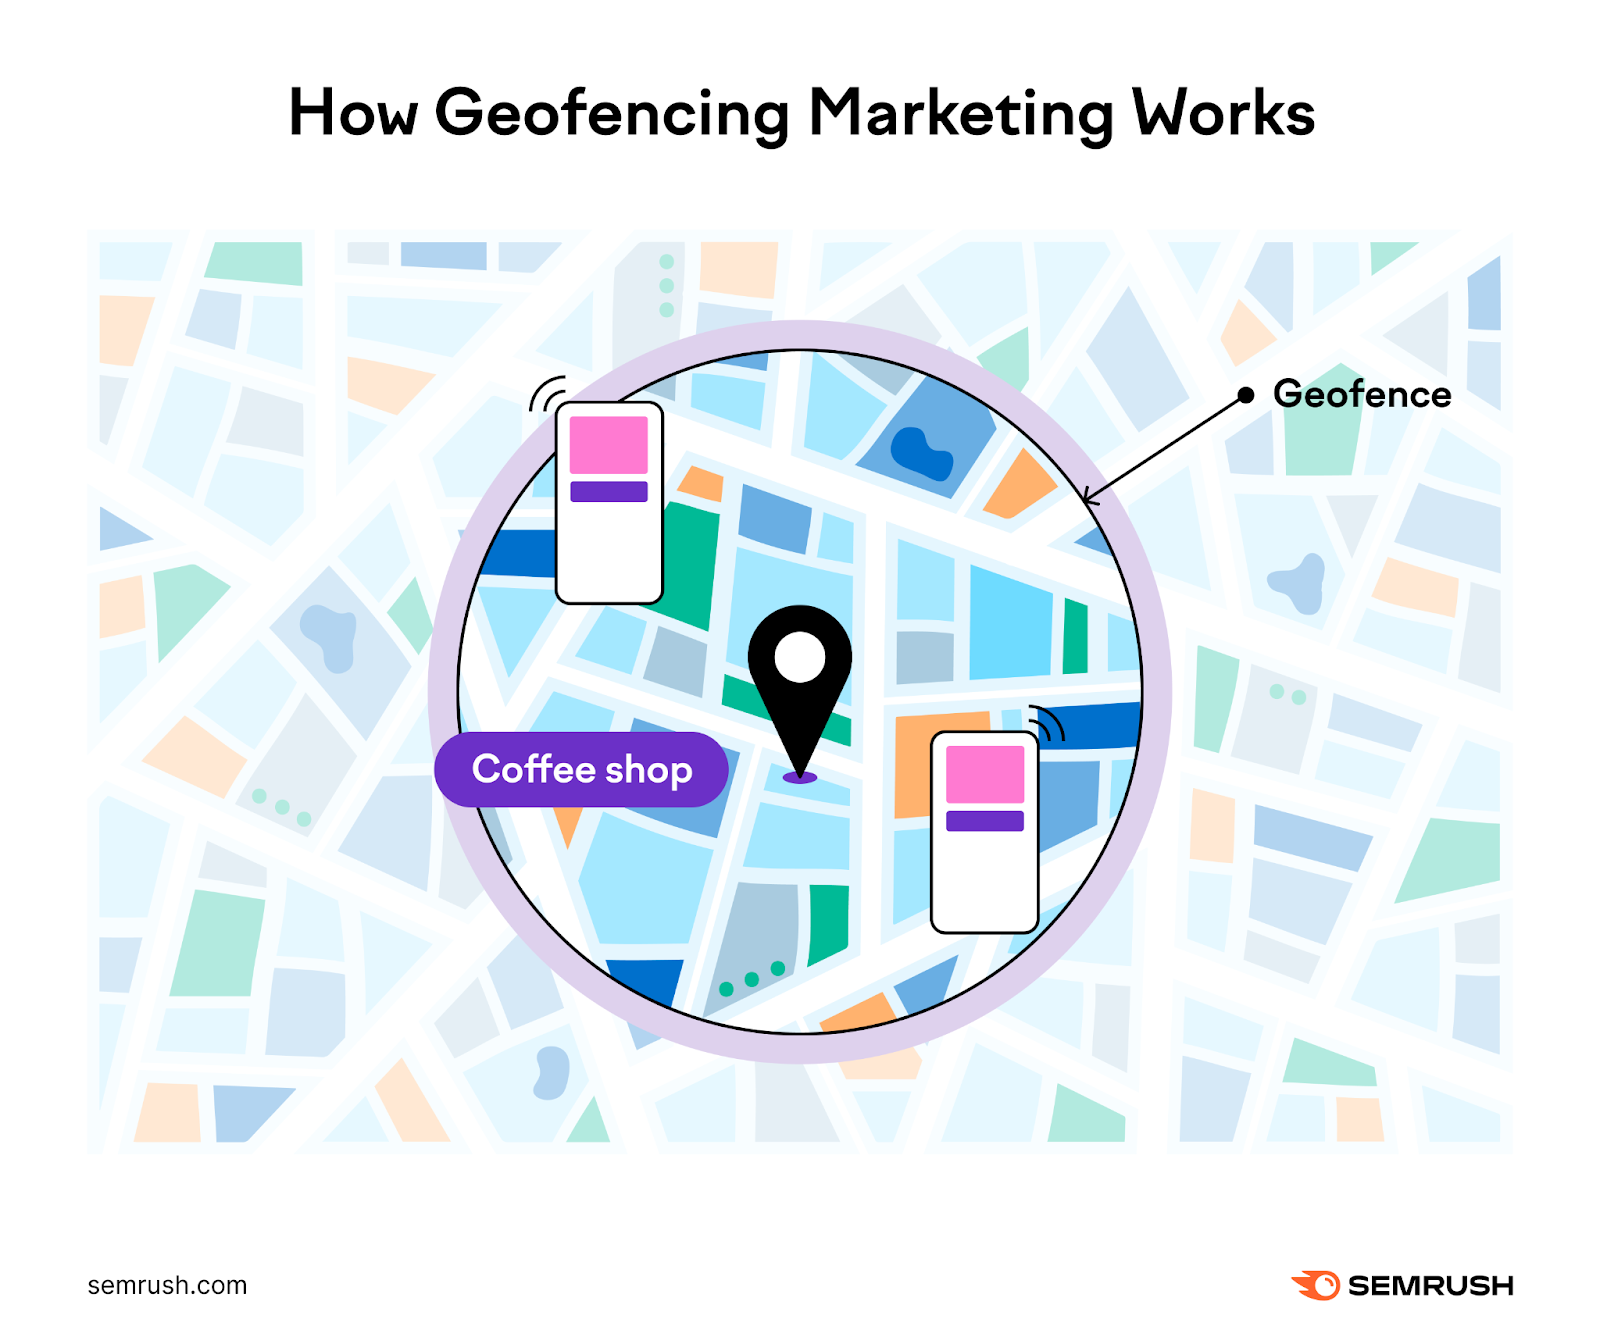 An infographic showing how geofencing marketing works